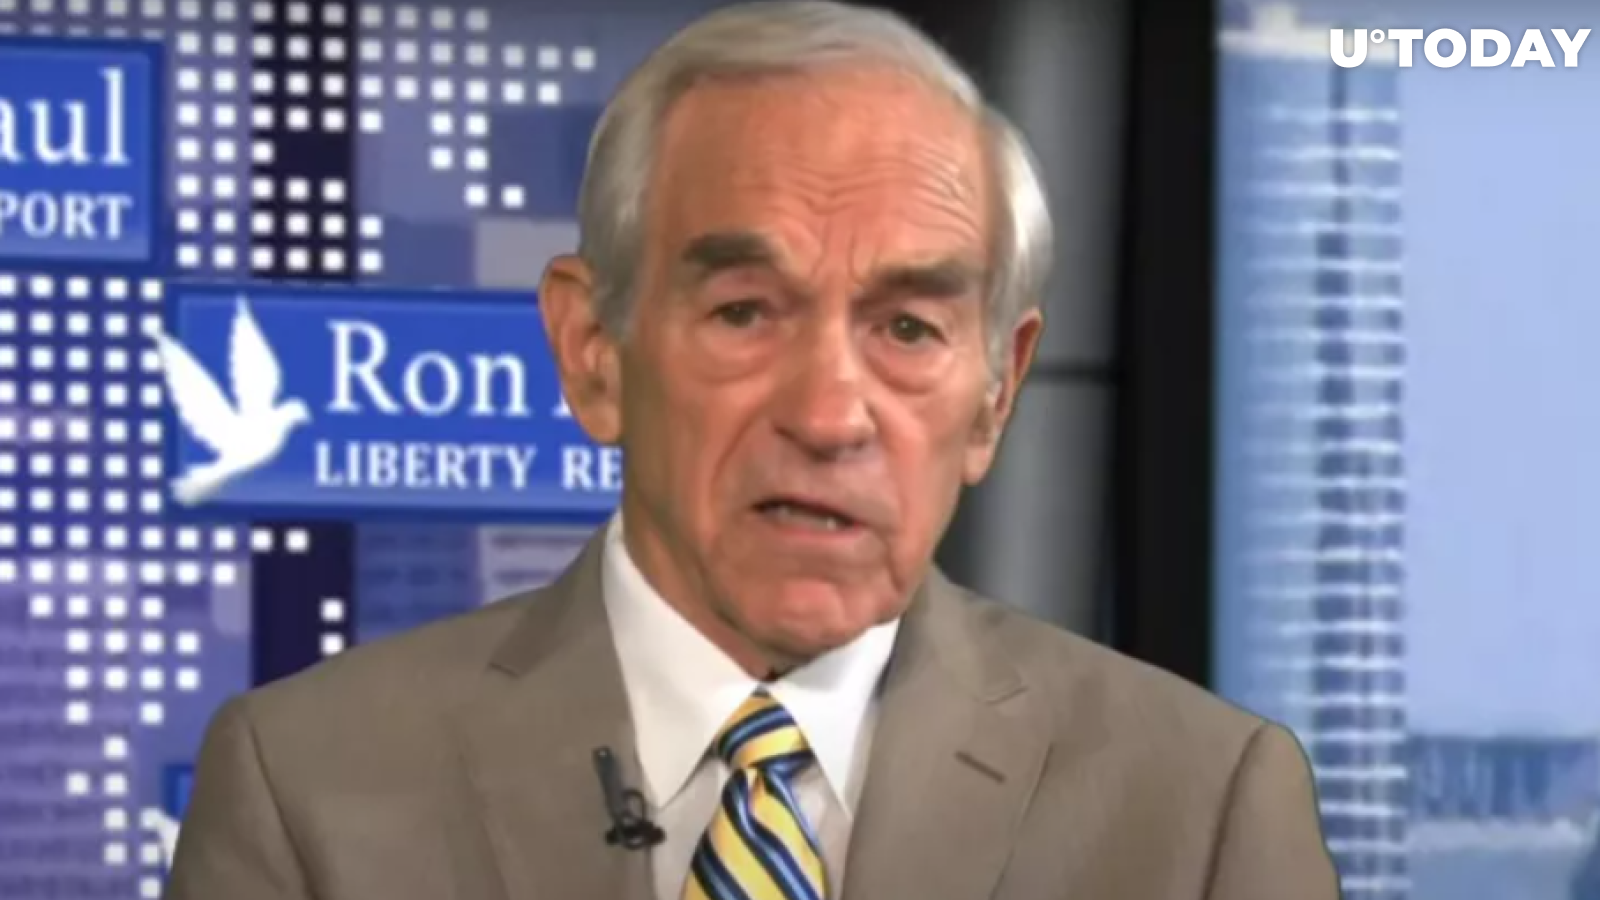 Libertarian Icon and Bitcoin Proponent Ron Paul Hospitalized After Suffering Medical Emergency During His Show